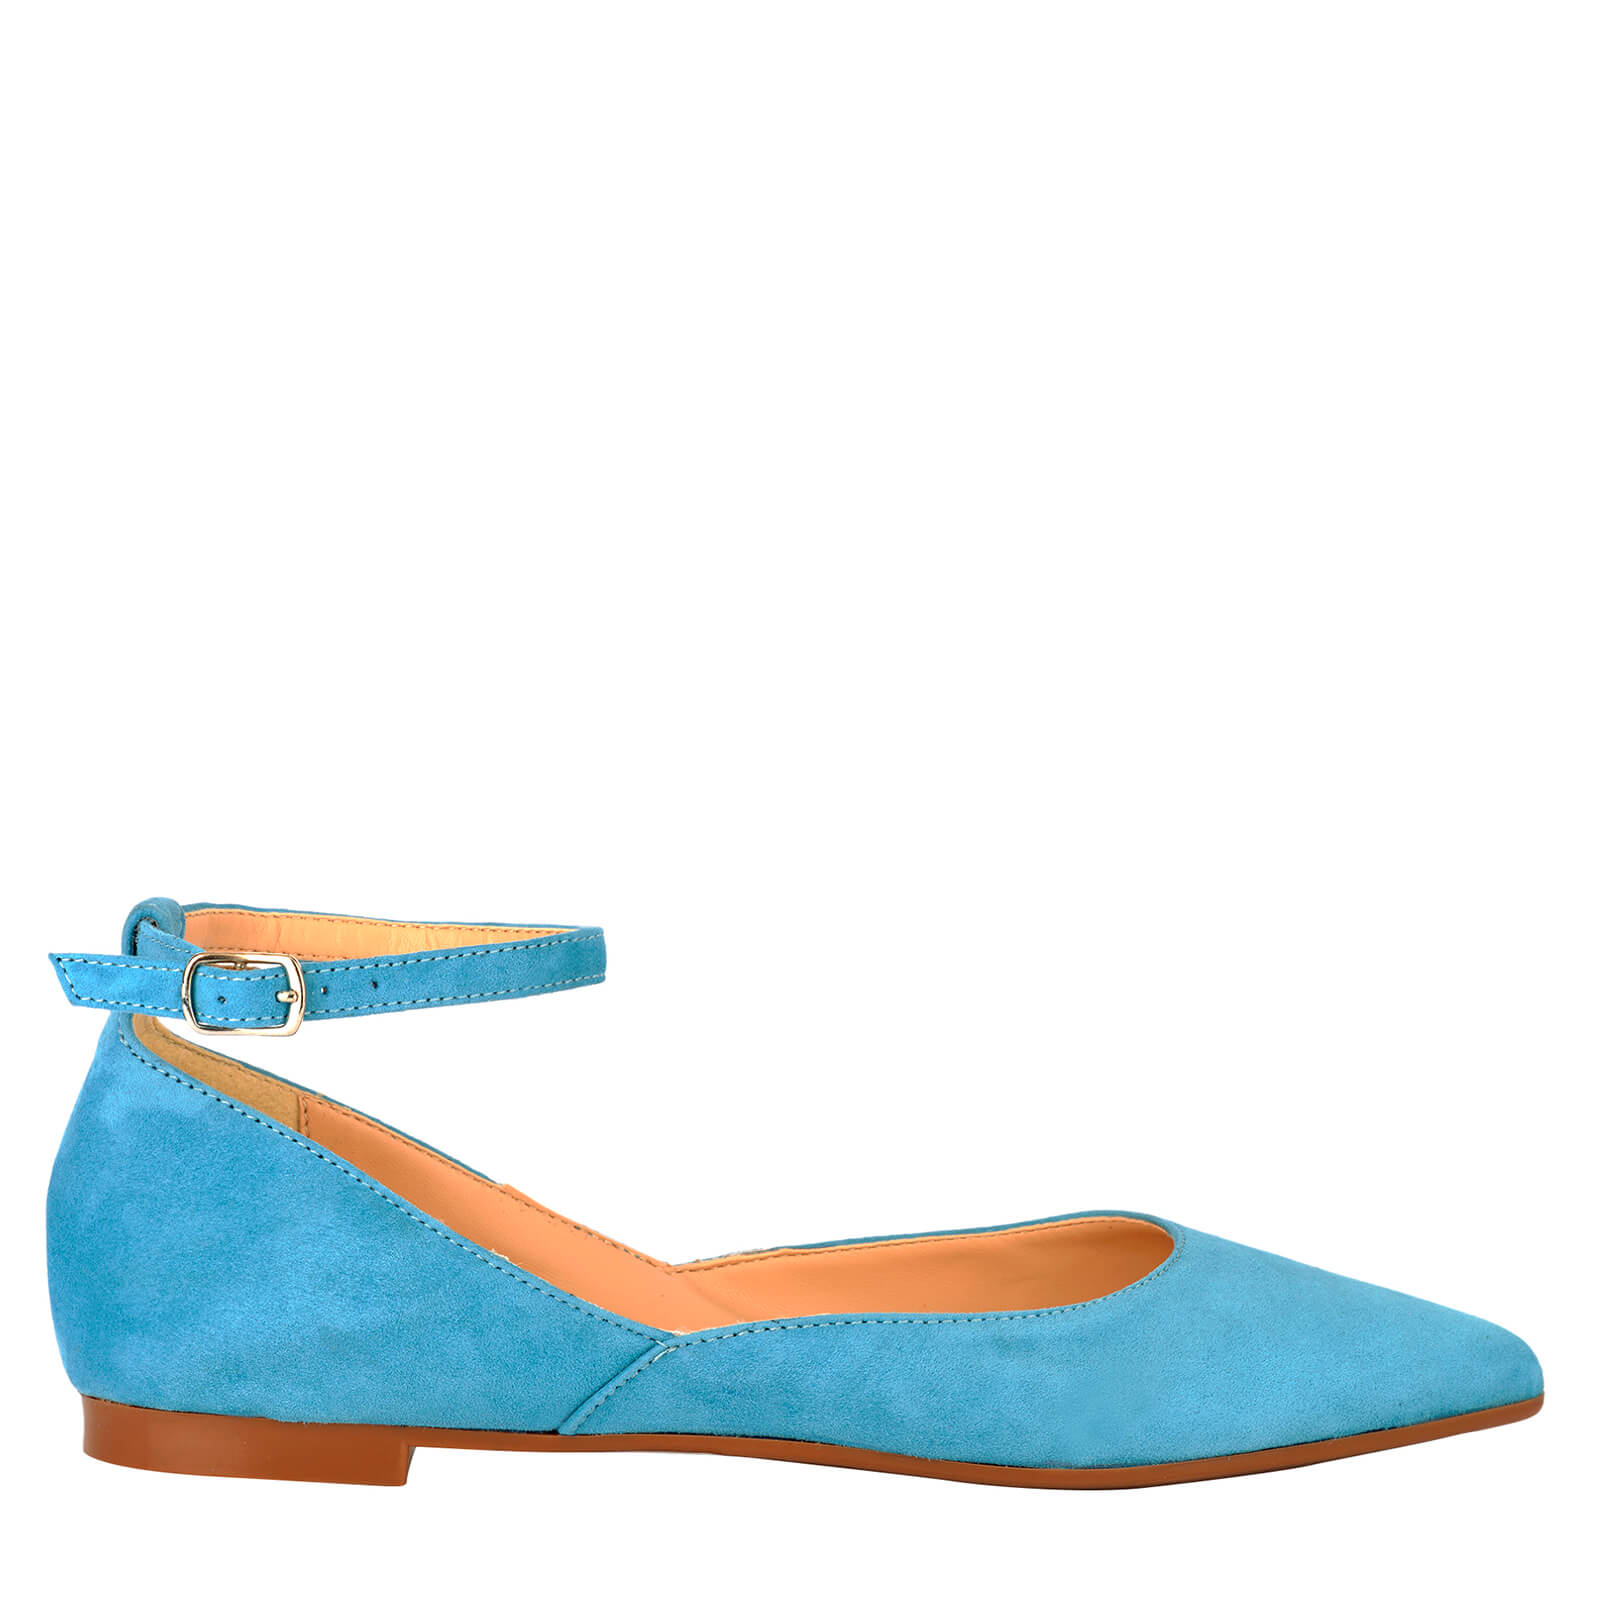 Flat shoes with strap – Bluee - Formentini